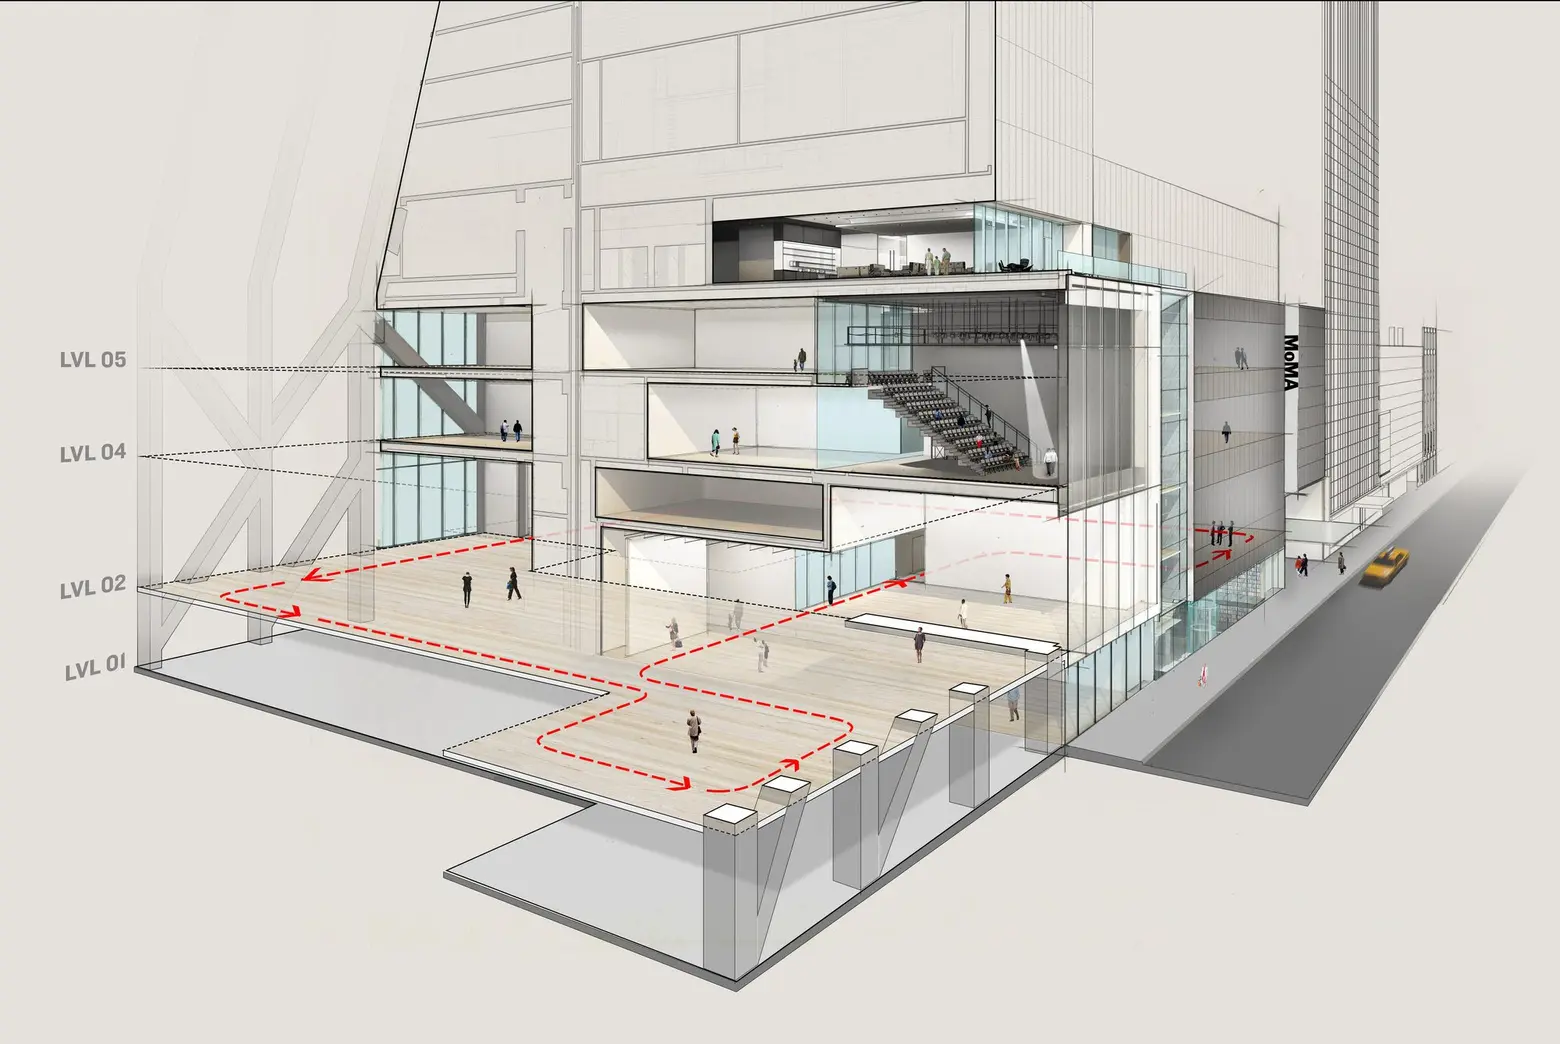 MoMA scales back expansion by Diller Scofidio + Renfro